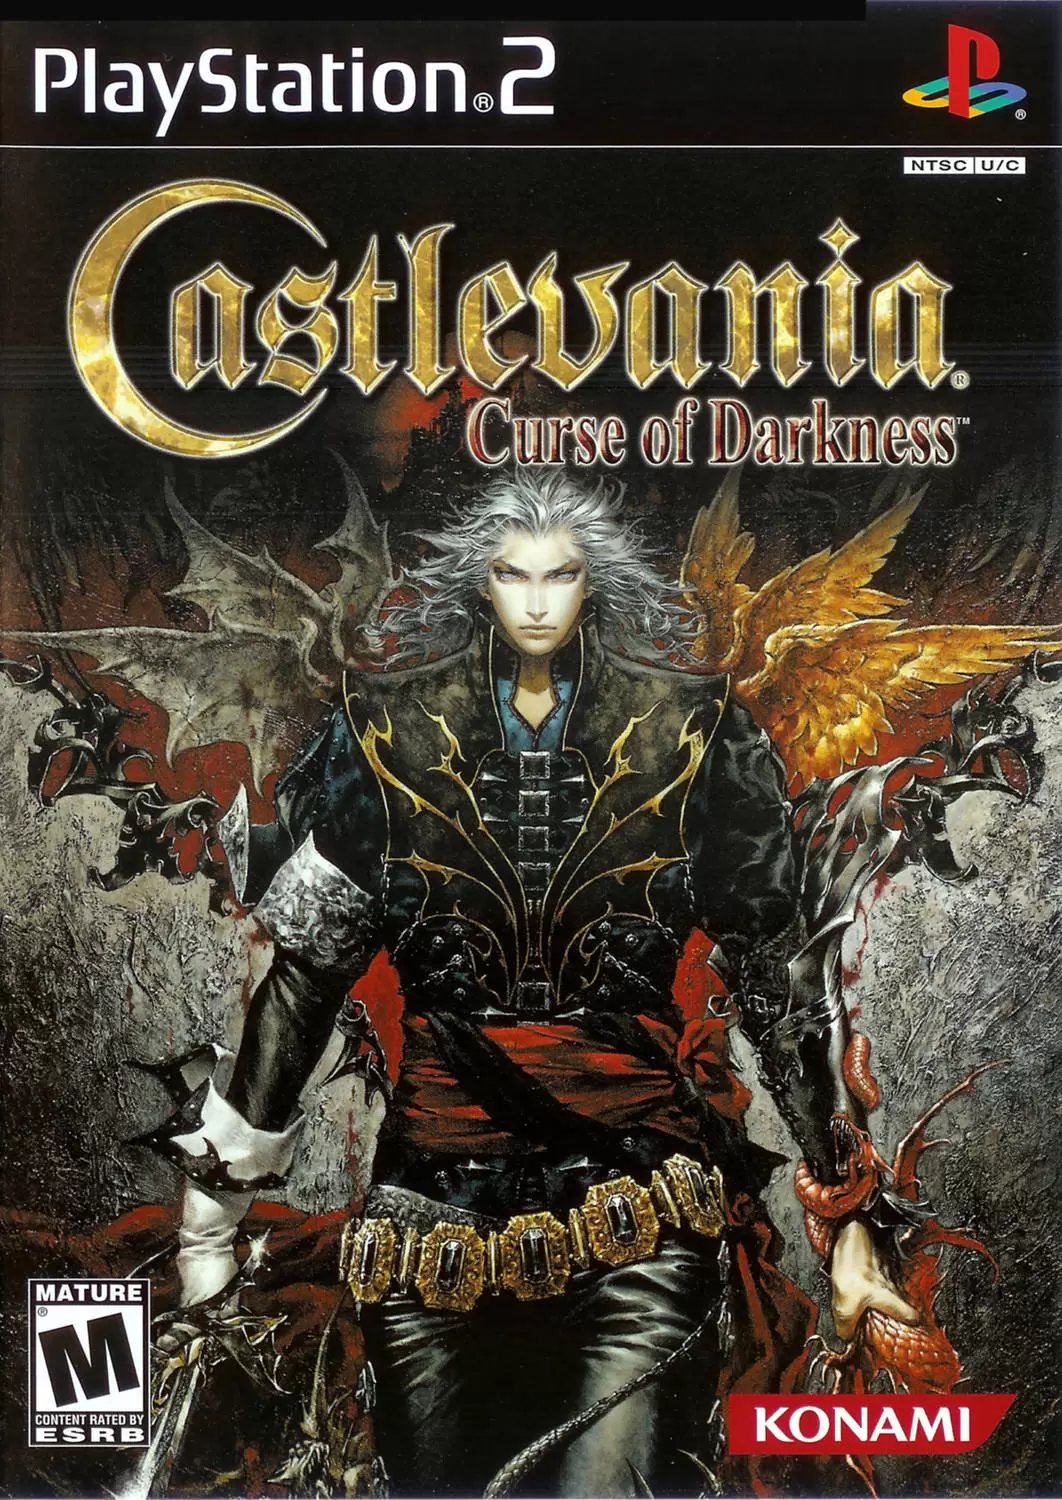 PS2 Games - Castlevania: Curse of Darkness